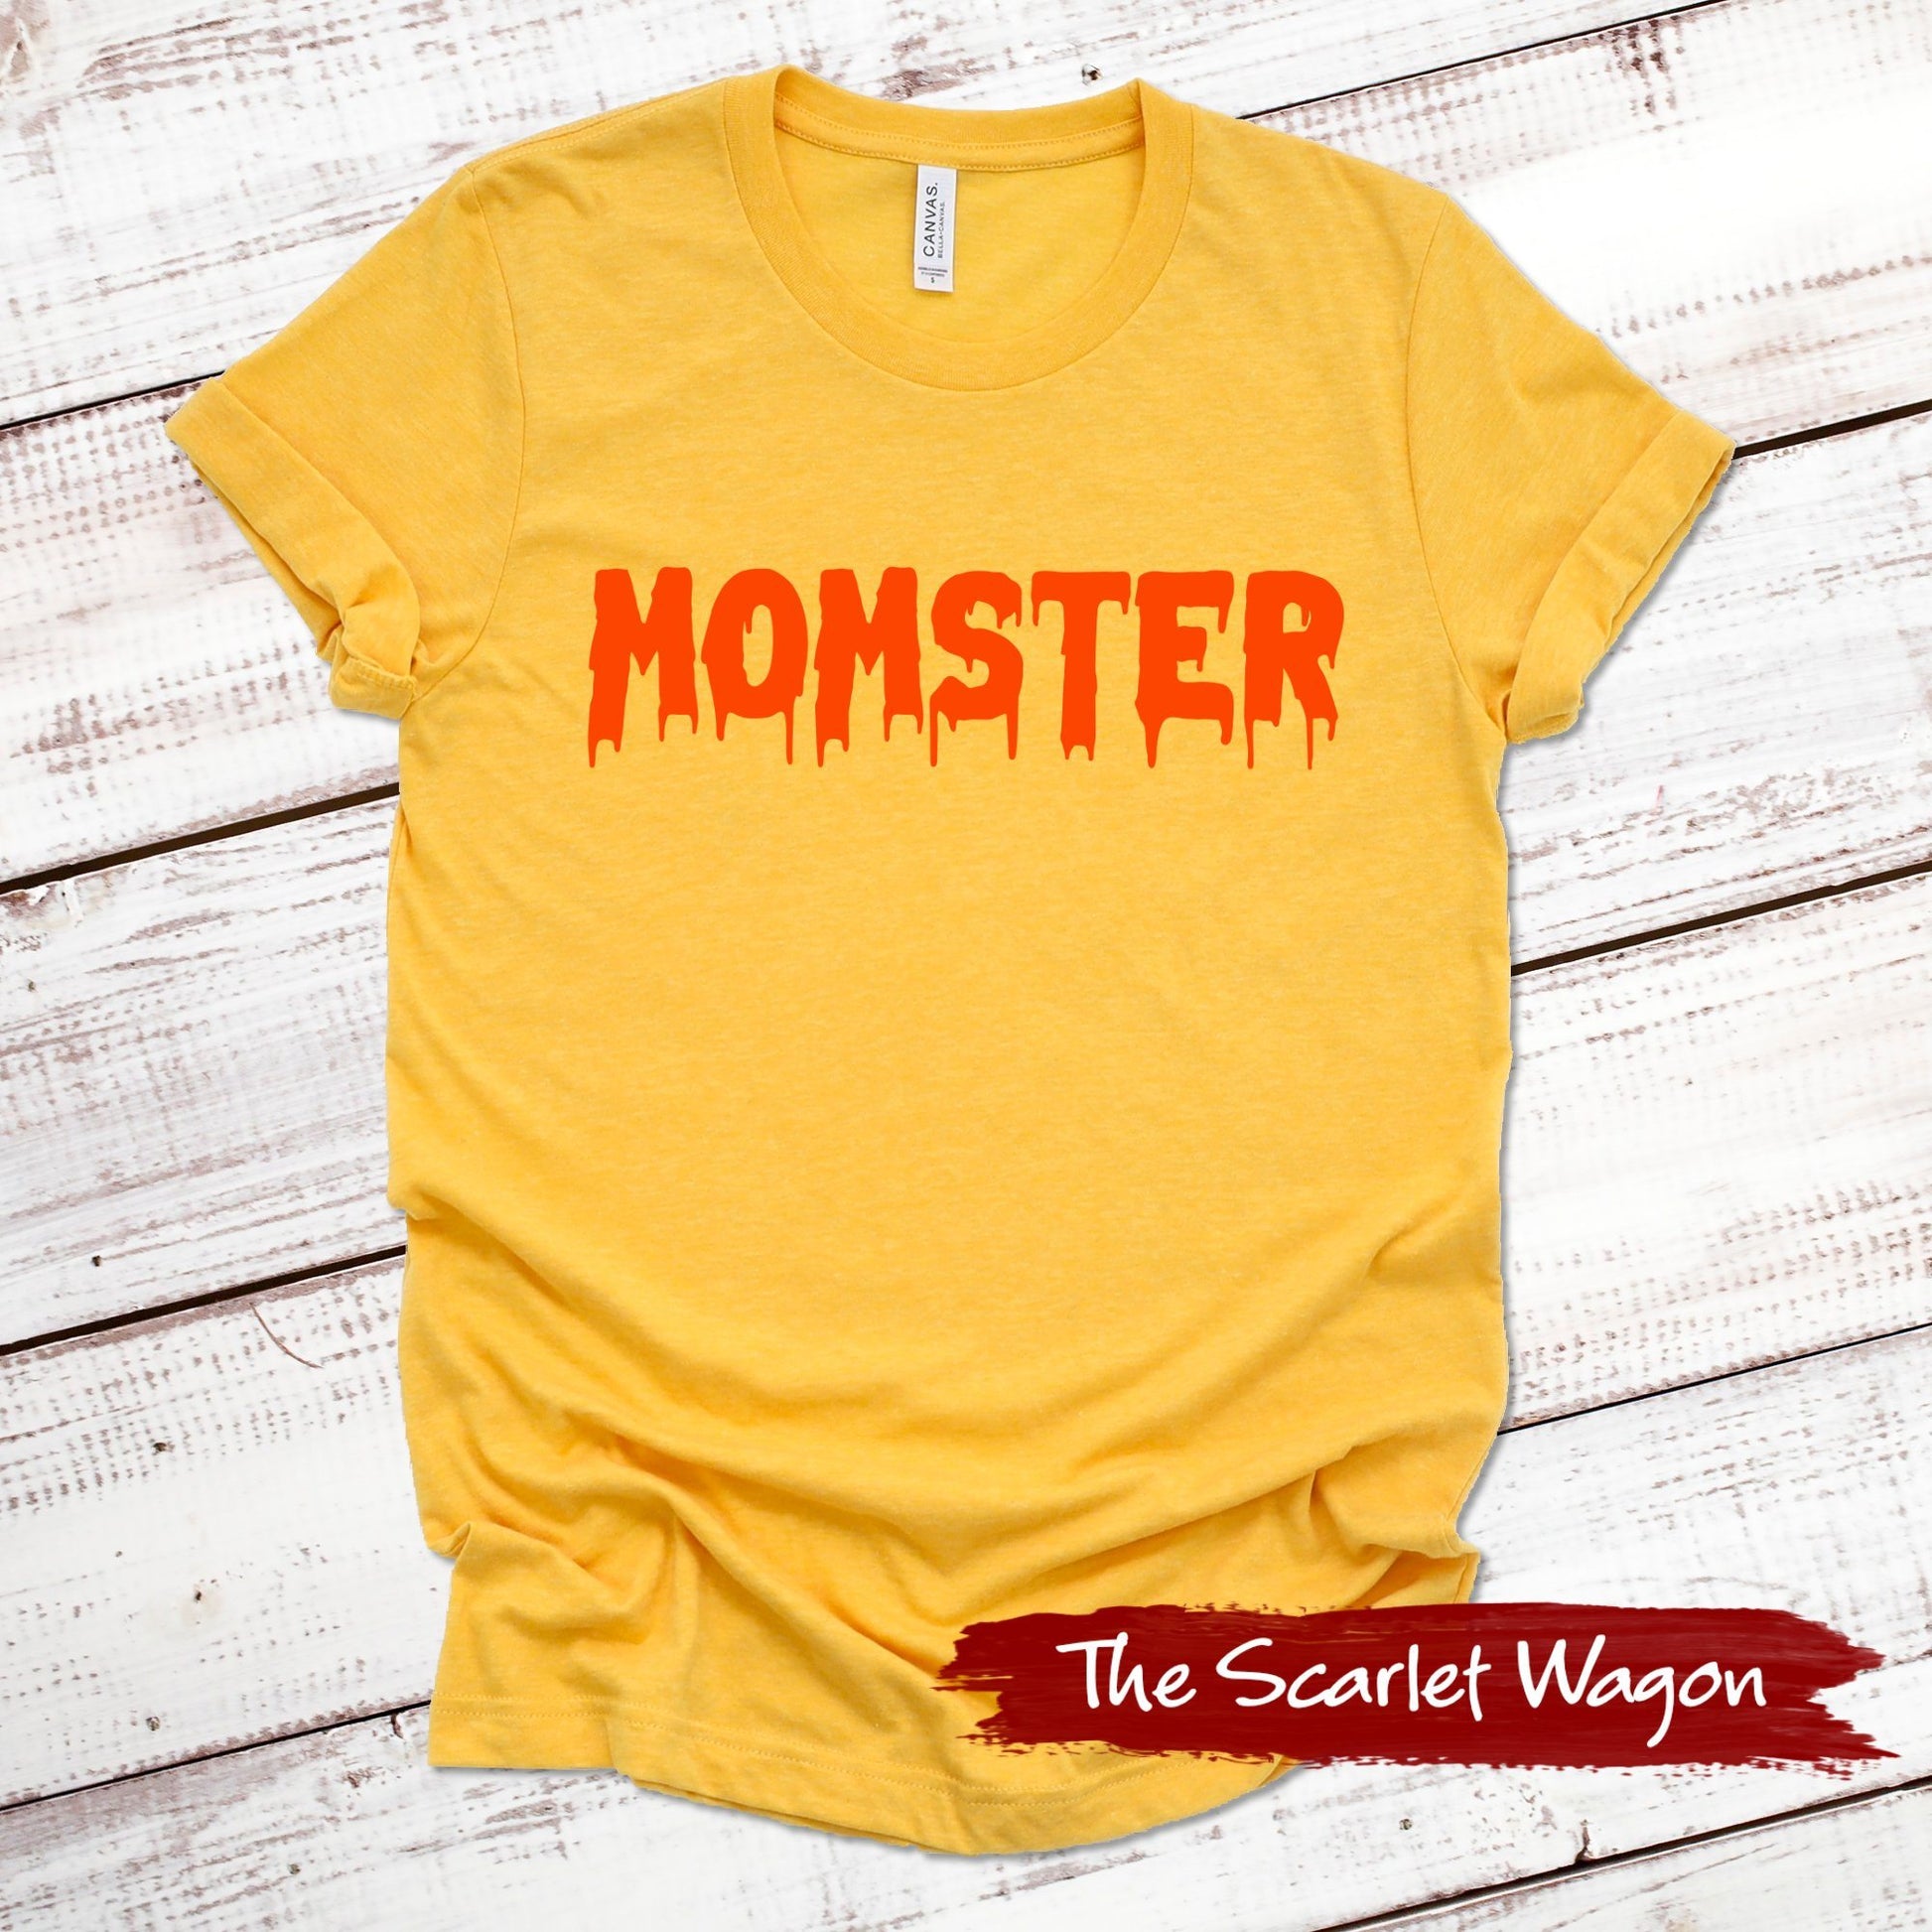 Momster Halloween Shirt Scarlet Wagon Heather Gold XS 